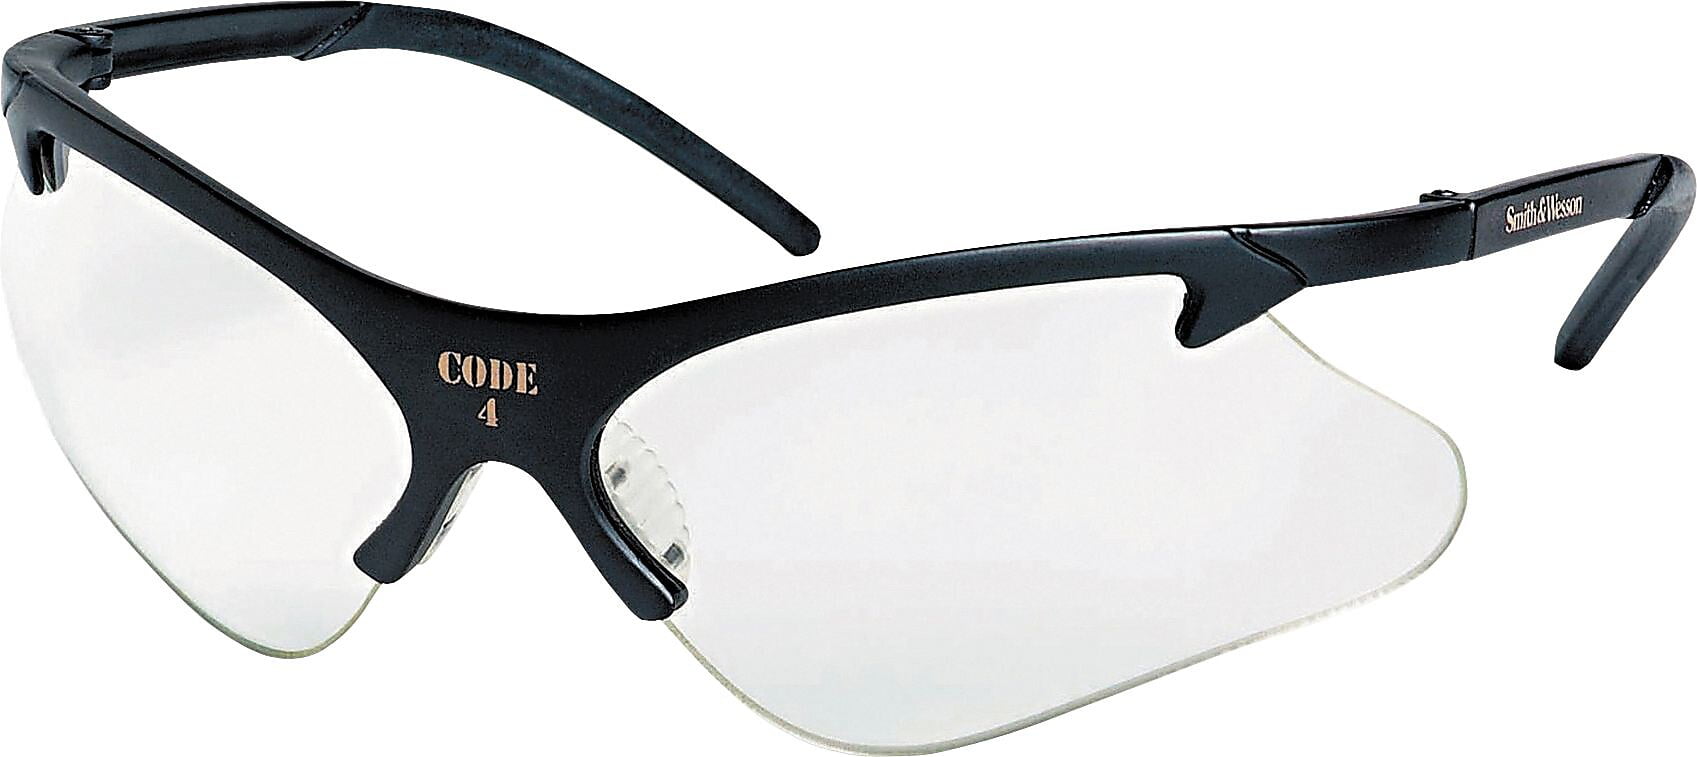 Smith & Wesson Code 4 Safety Glasses with Clear Lenses ANSI Z87 